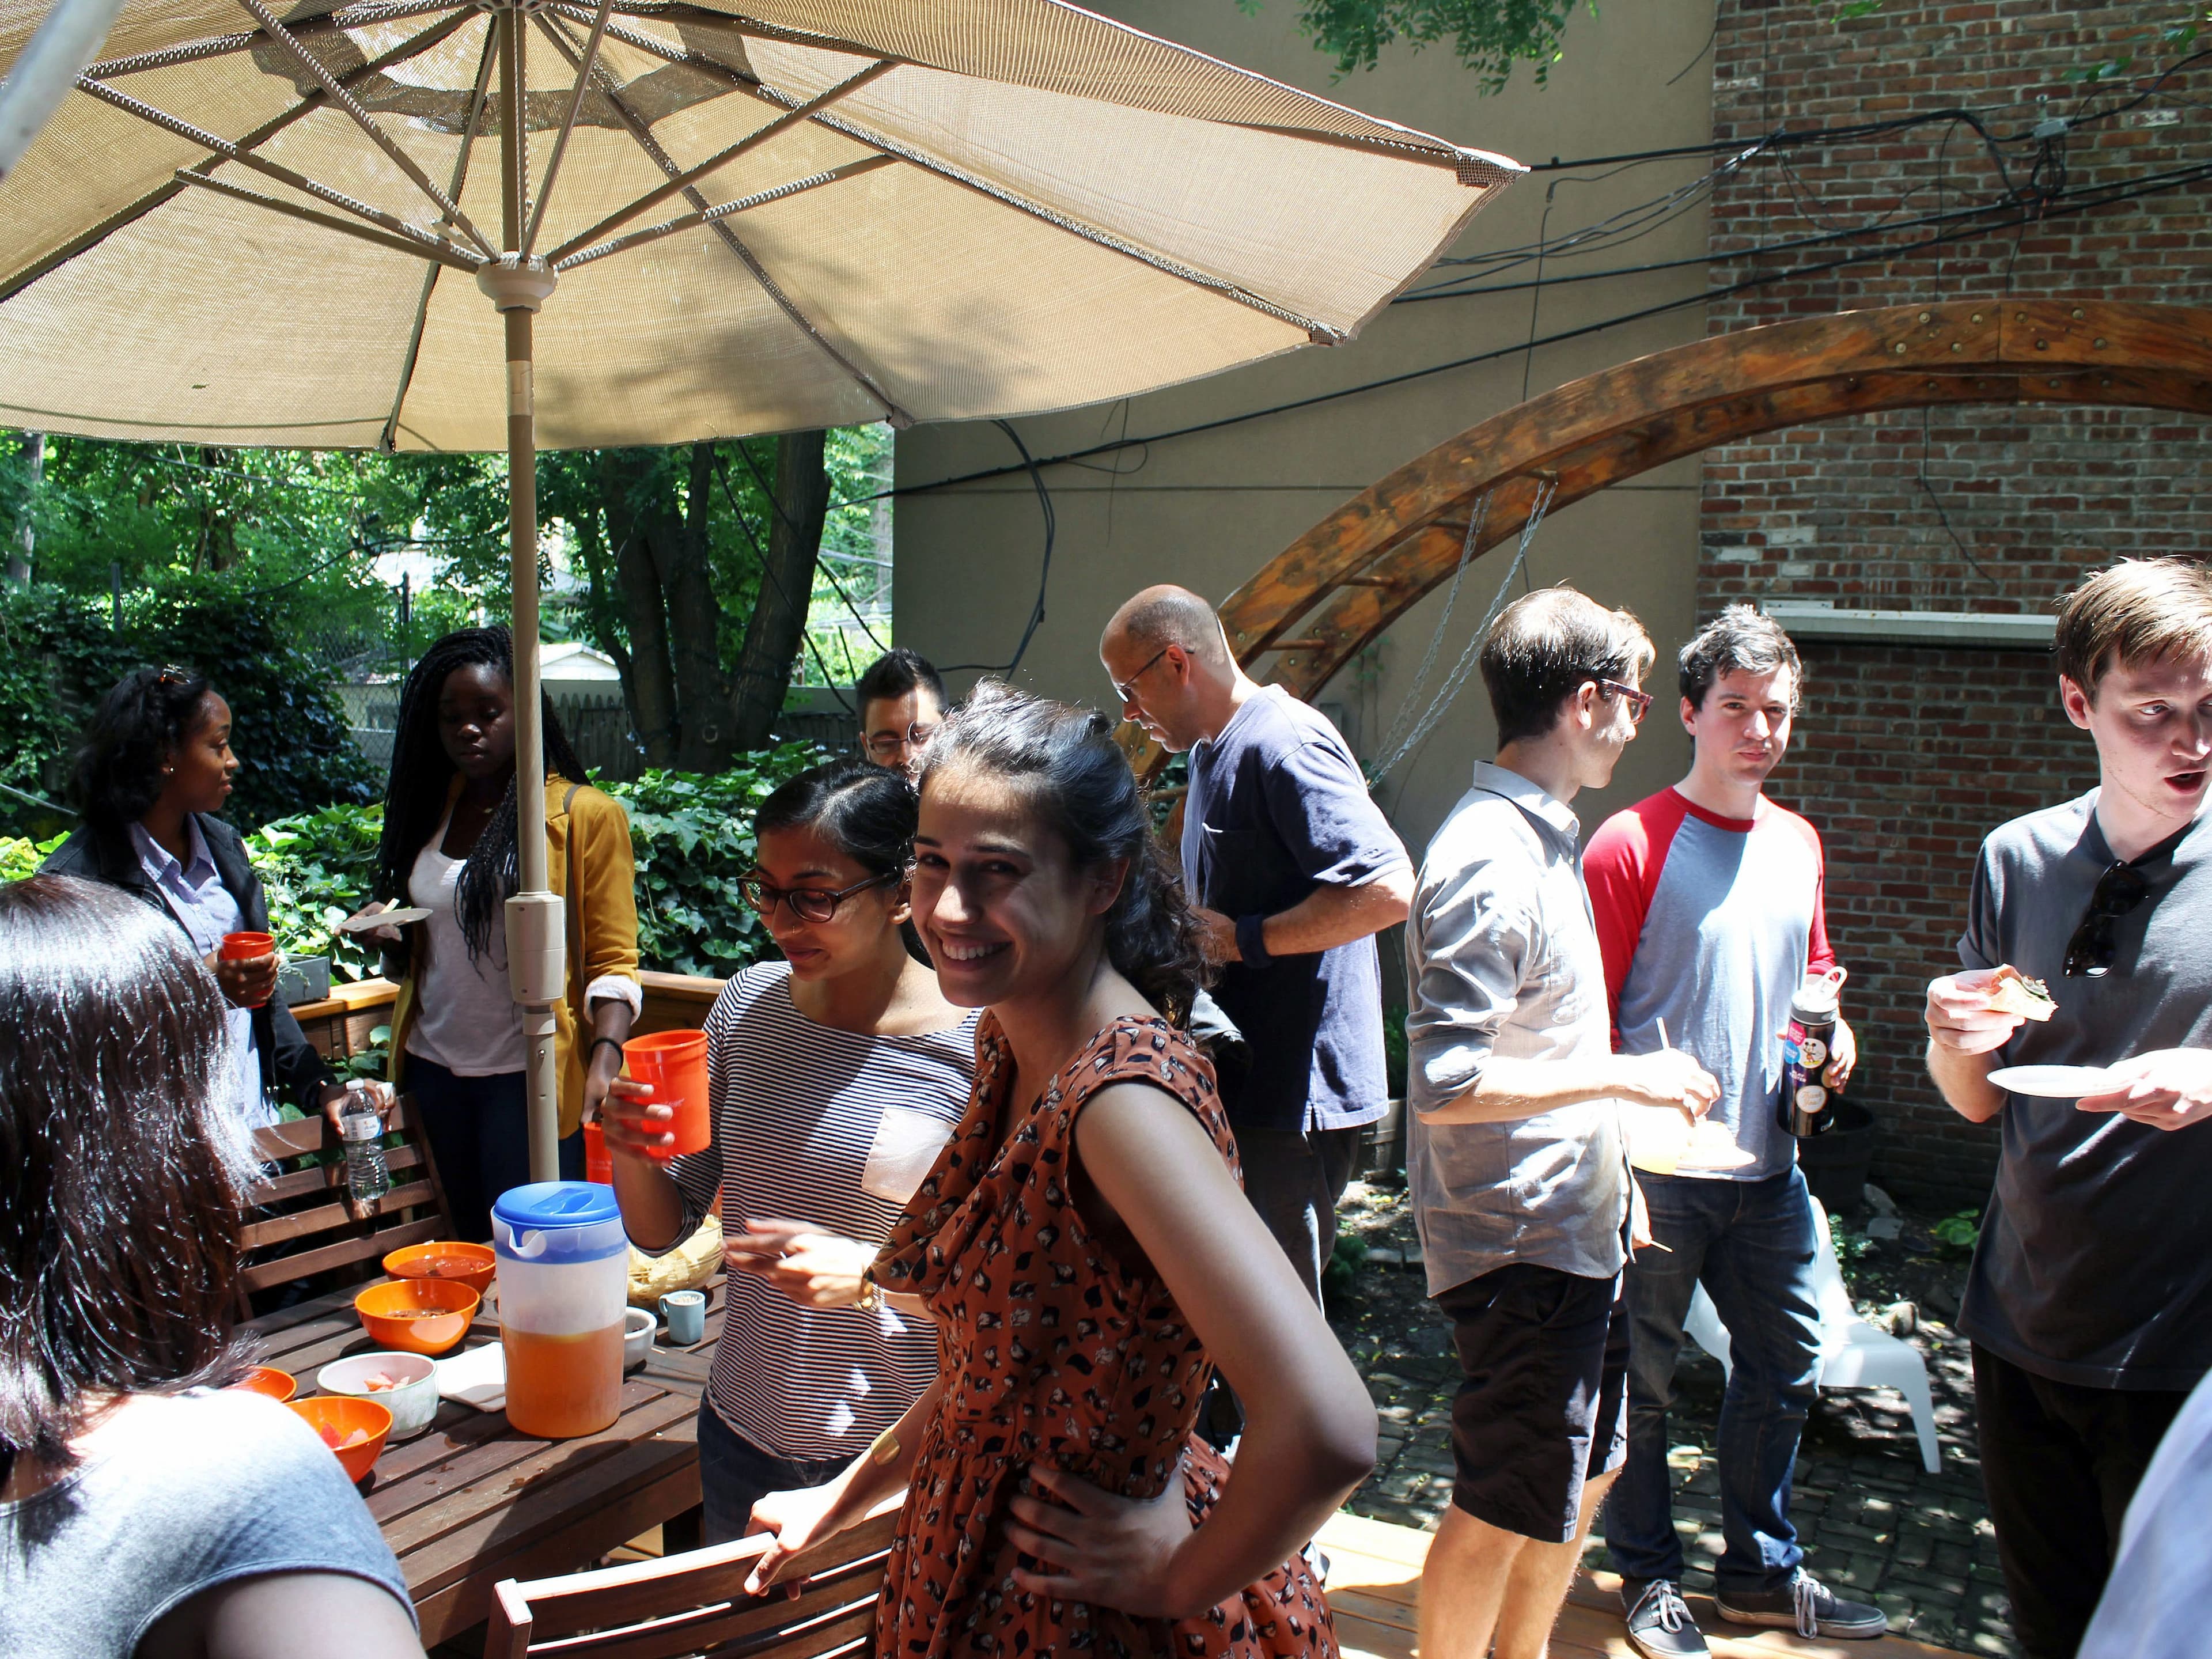 A group of people gather outdoors under a large umbrella in a garden setting. They are engaged in conversation, holding drinks, and eating food from a table filled with snacks. Trees and a brick wall with a wooden archway are visible in the background.